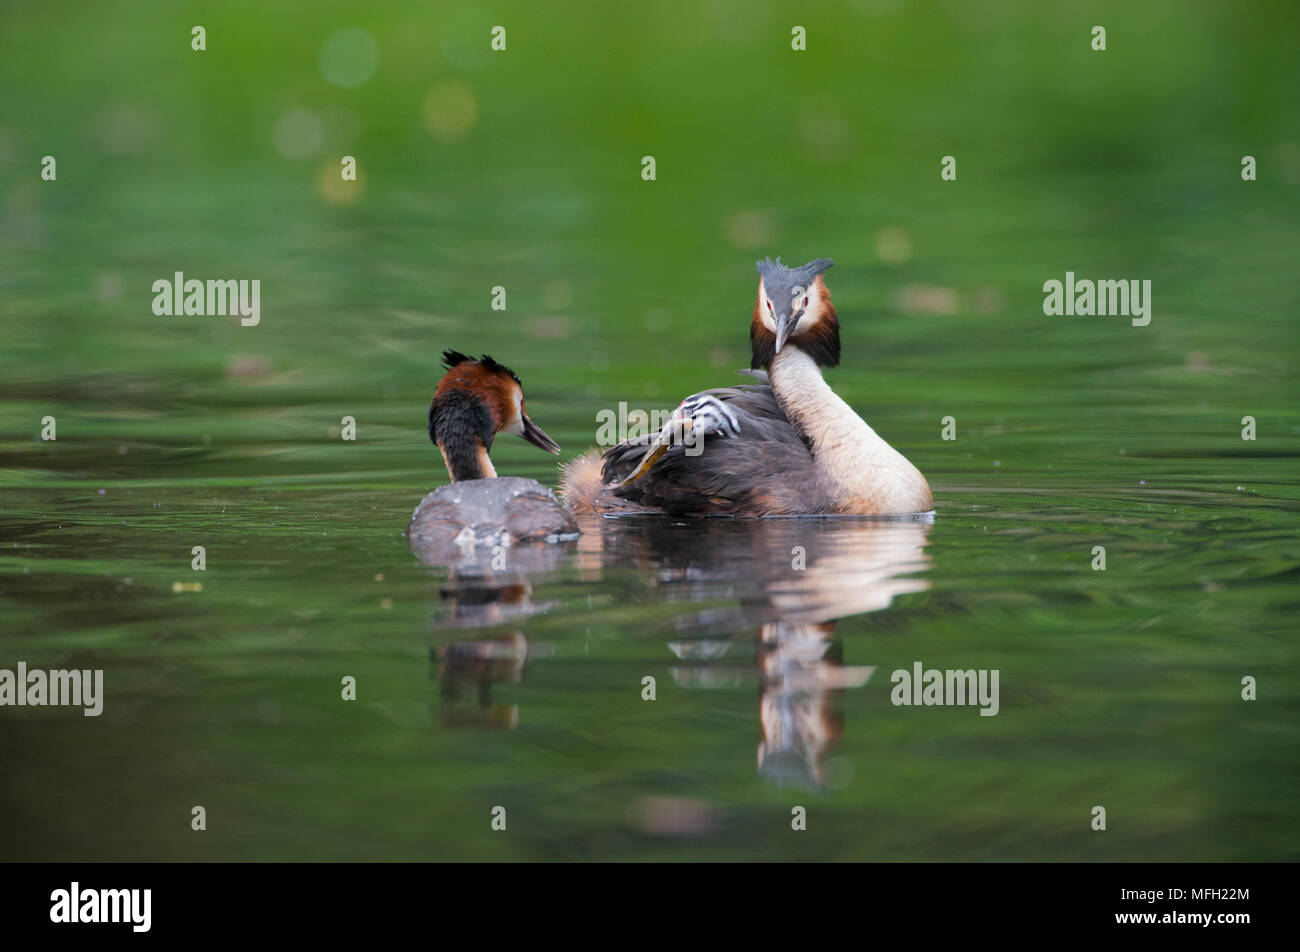 Great Crested Grebe pair, (Podiceps cristatus), parent bird carrying a single chick on its back, Regents Park, London, Briitish Isles, UK Stock Photo